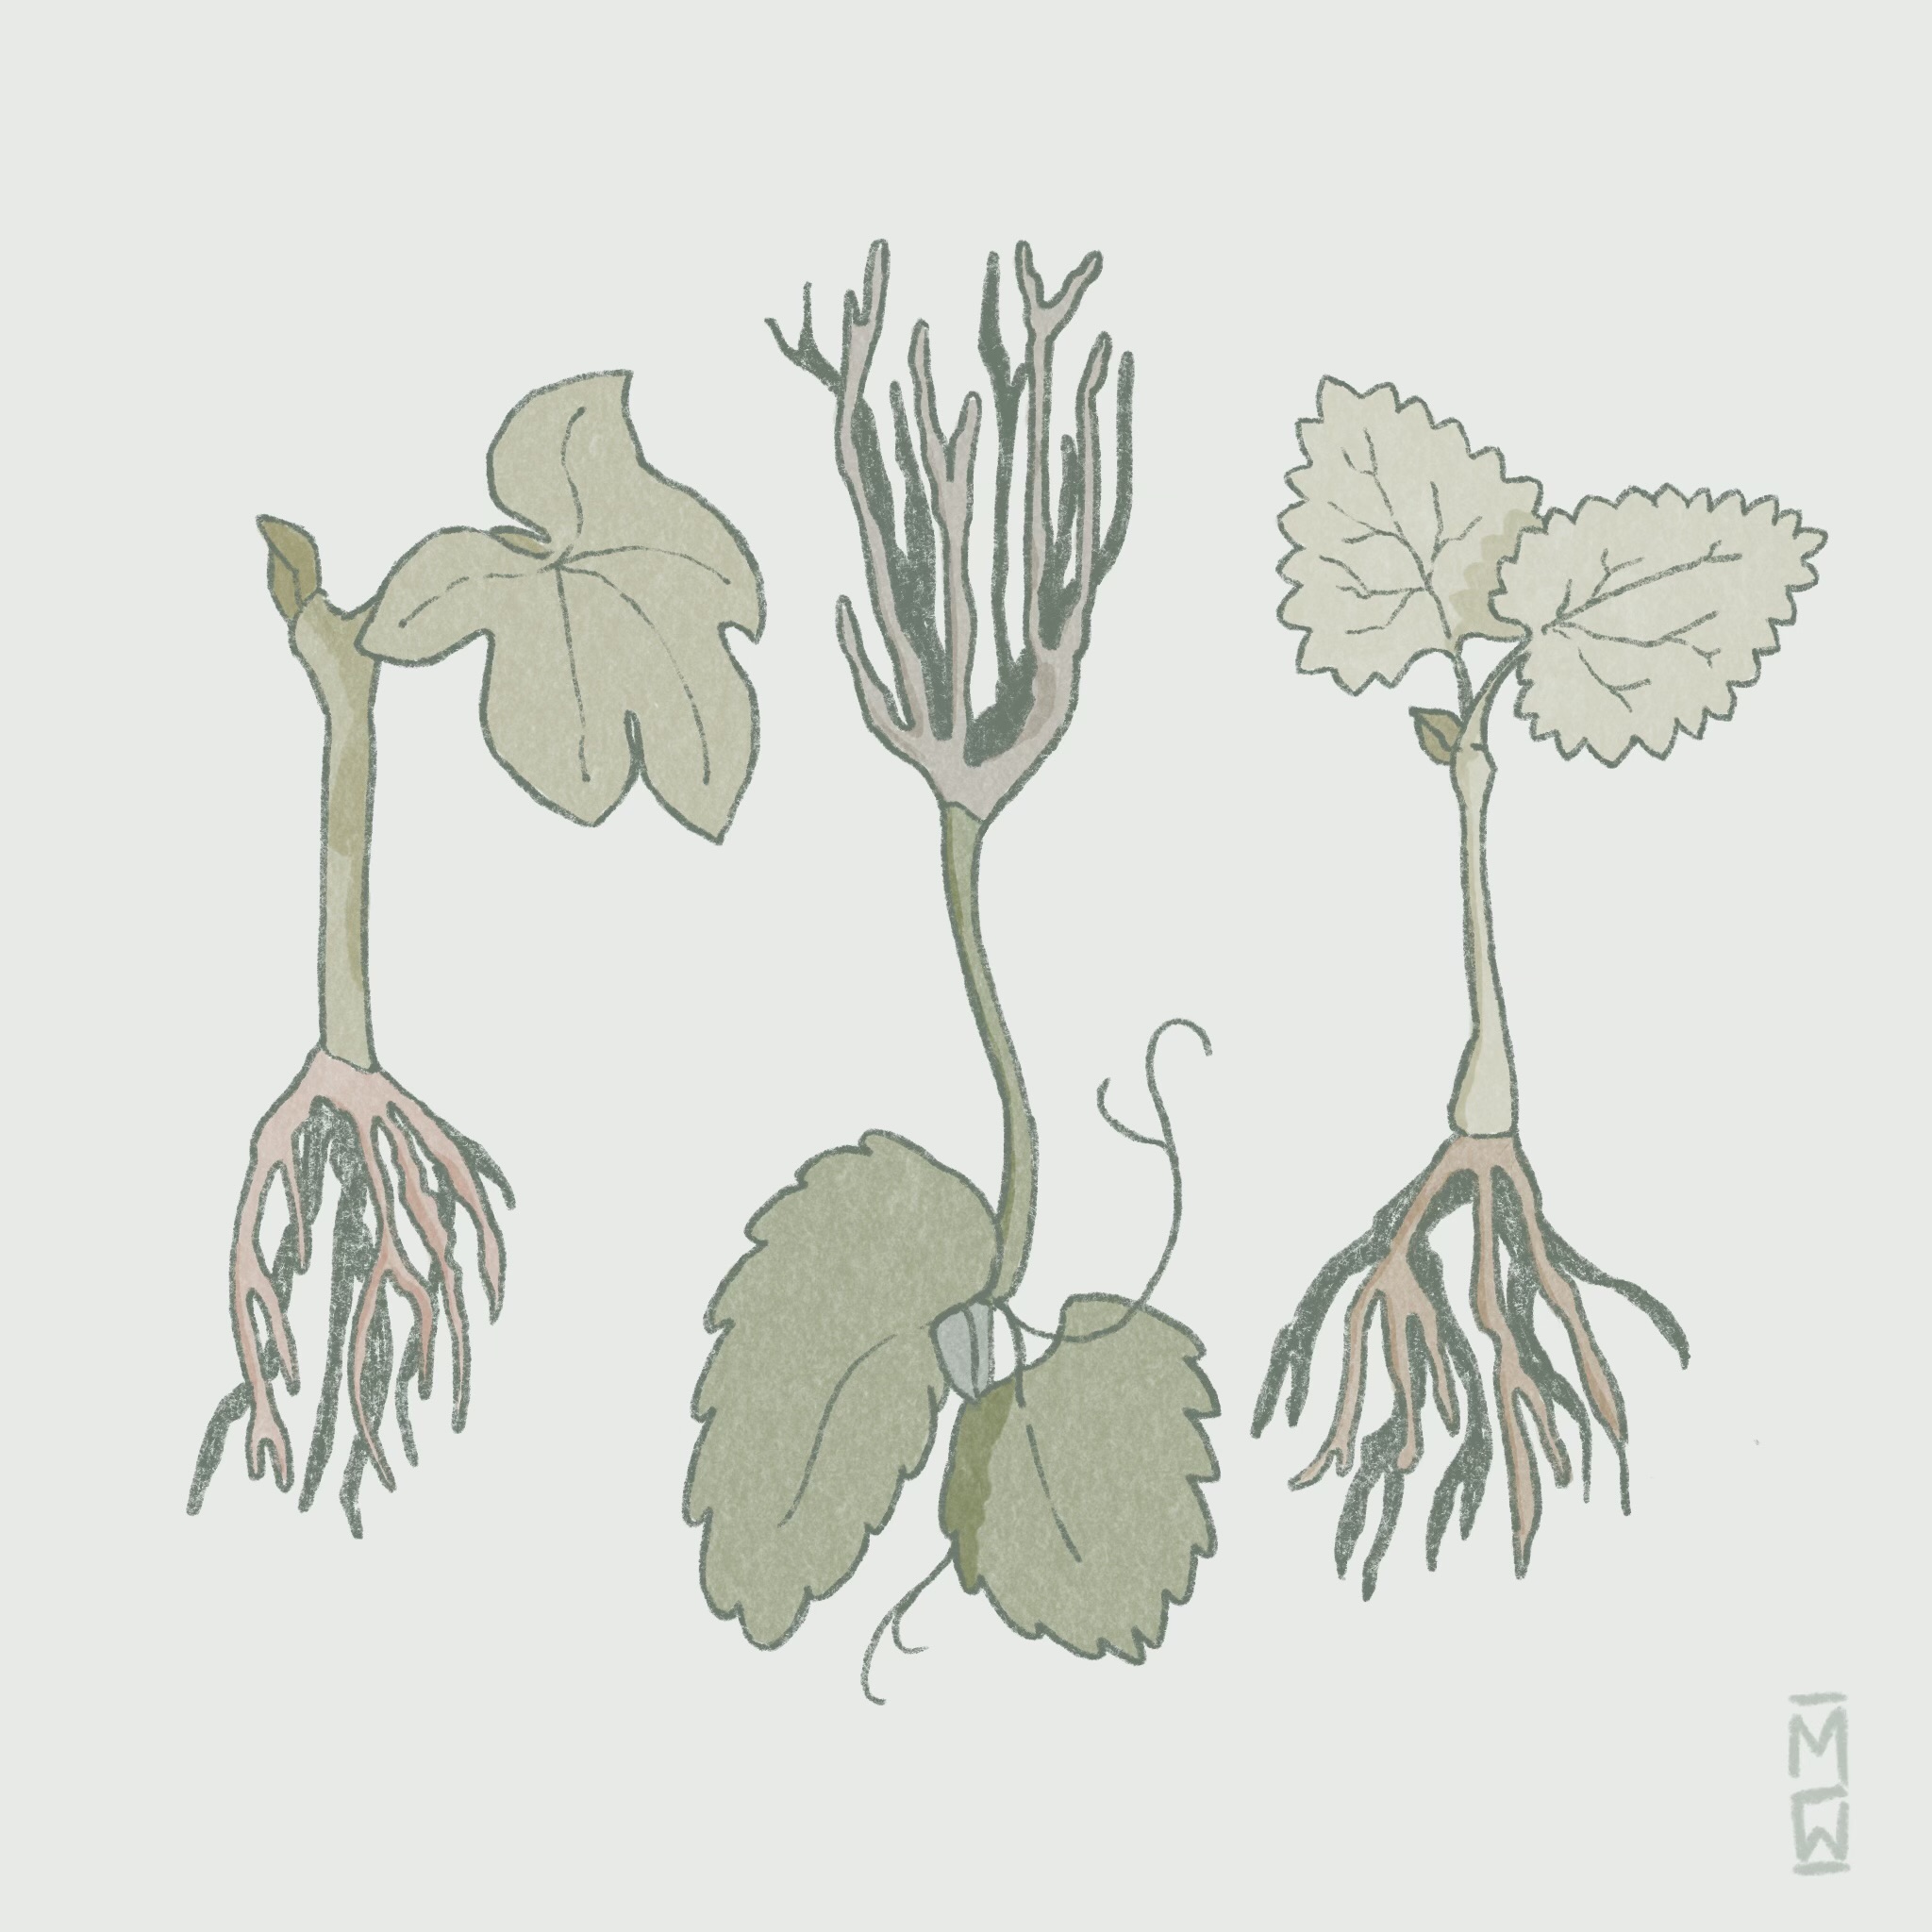 Image of three grapevine seedlings with diverse leaf shapes